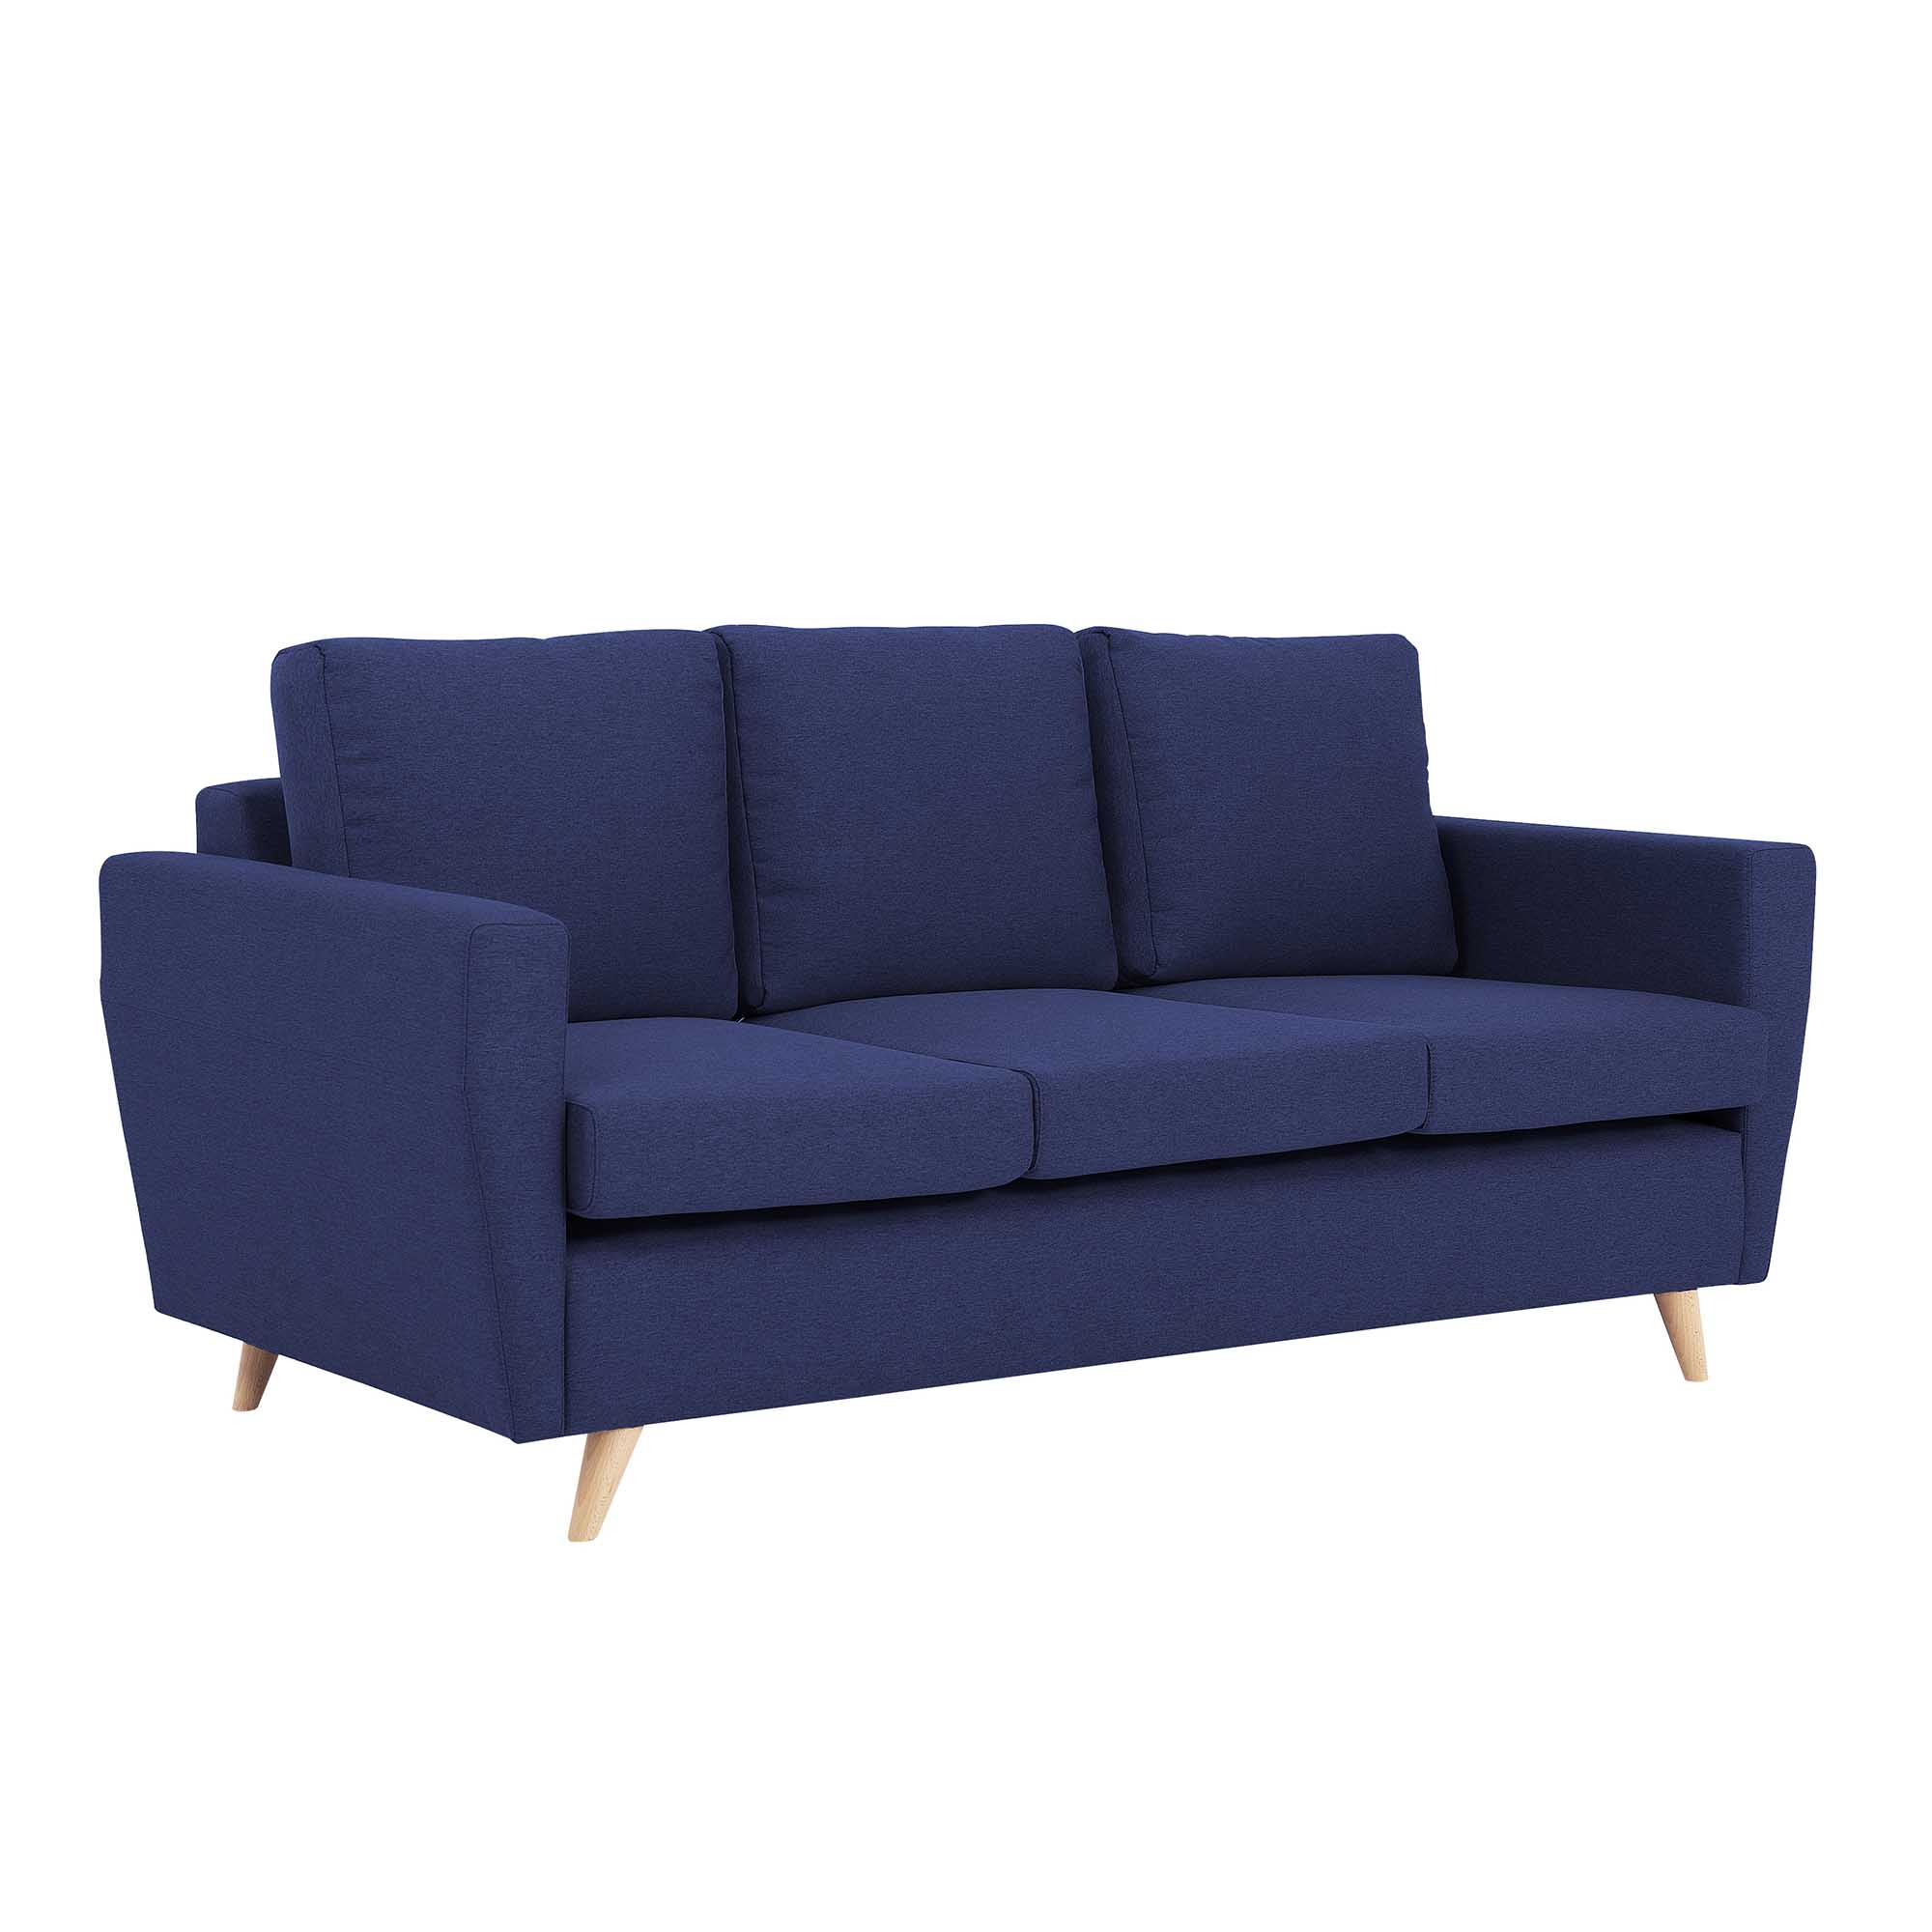 LOVER Sofa 3 Seater upholstery colour blue